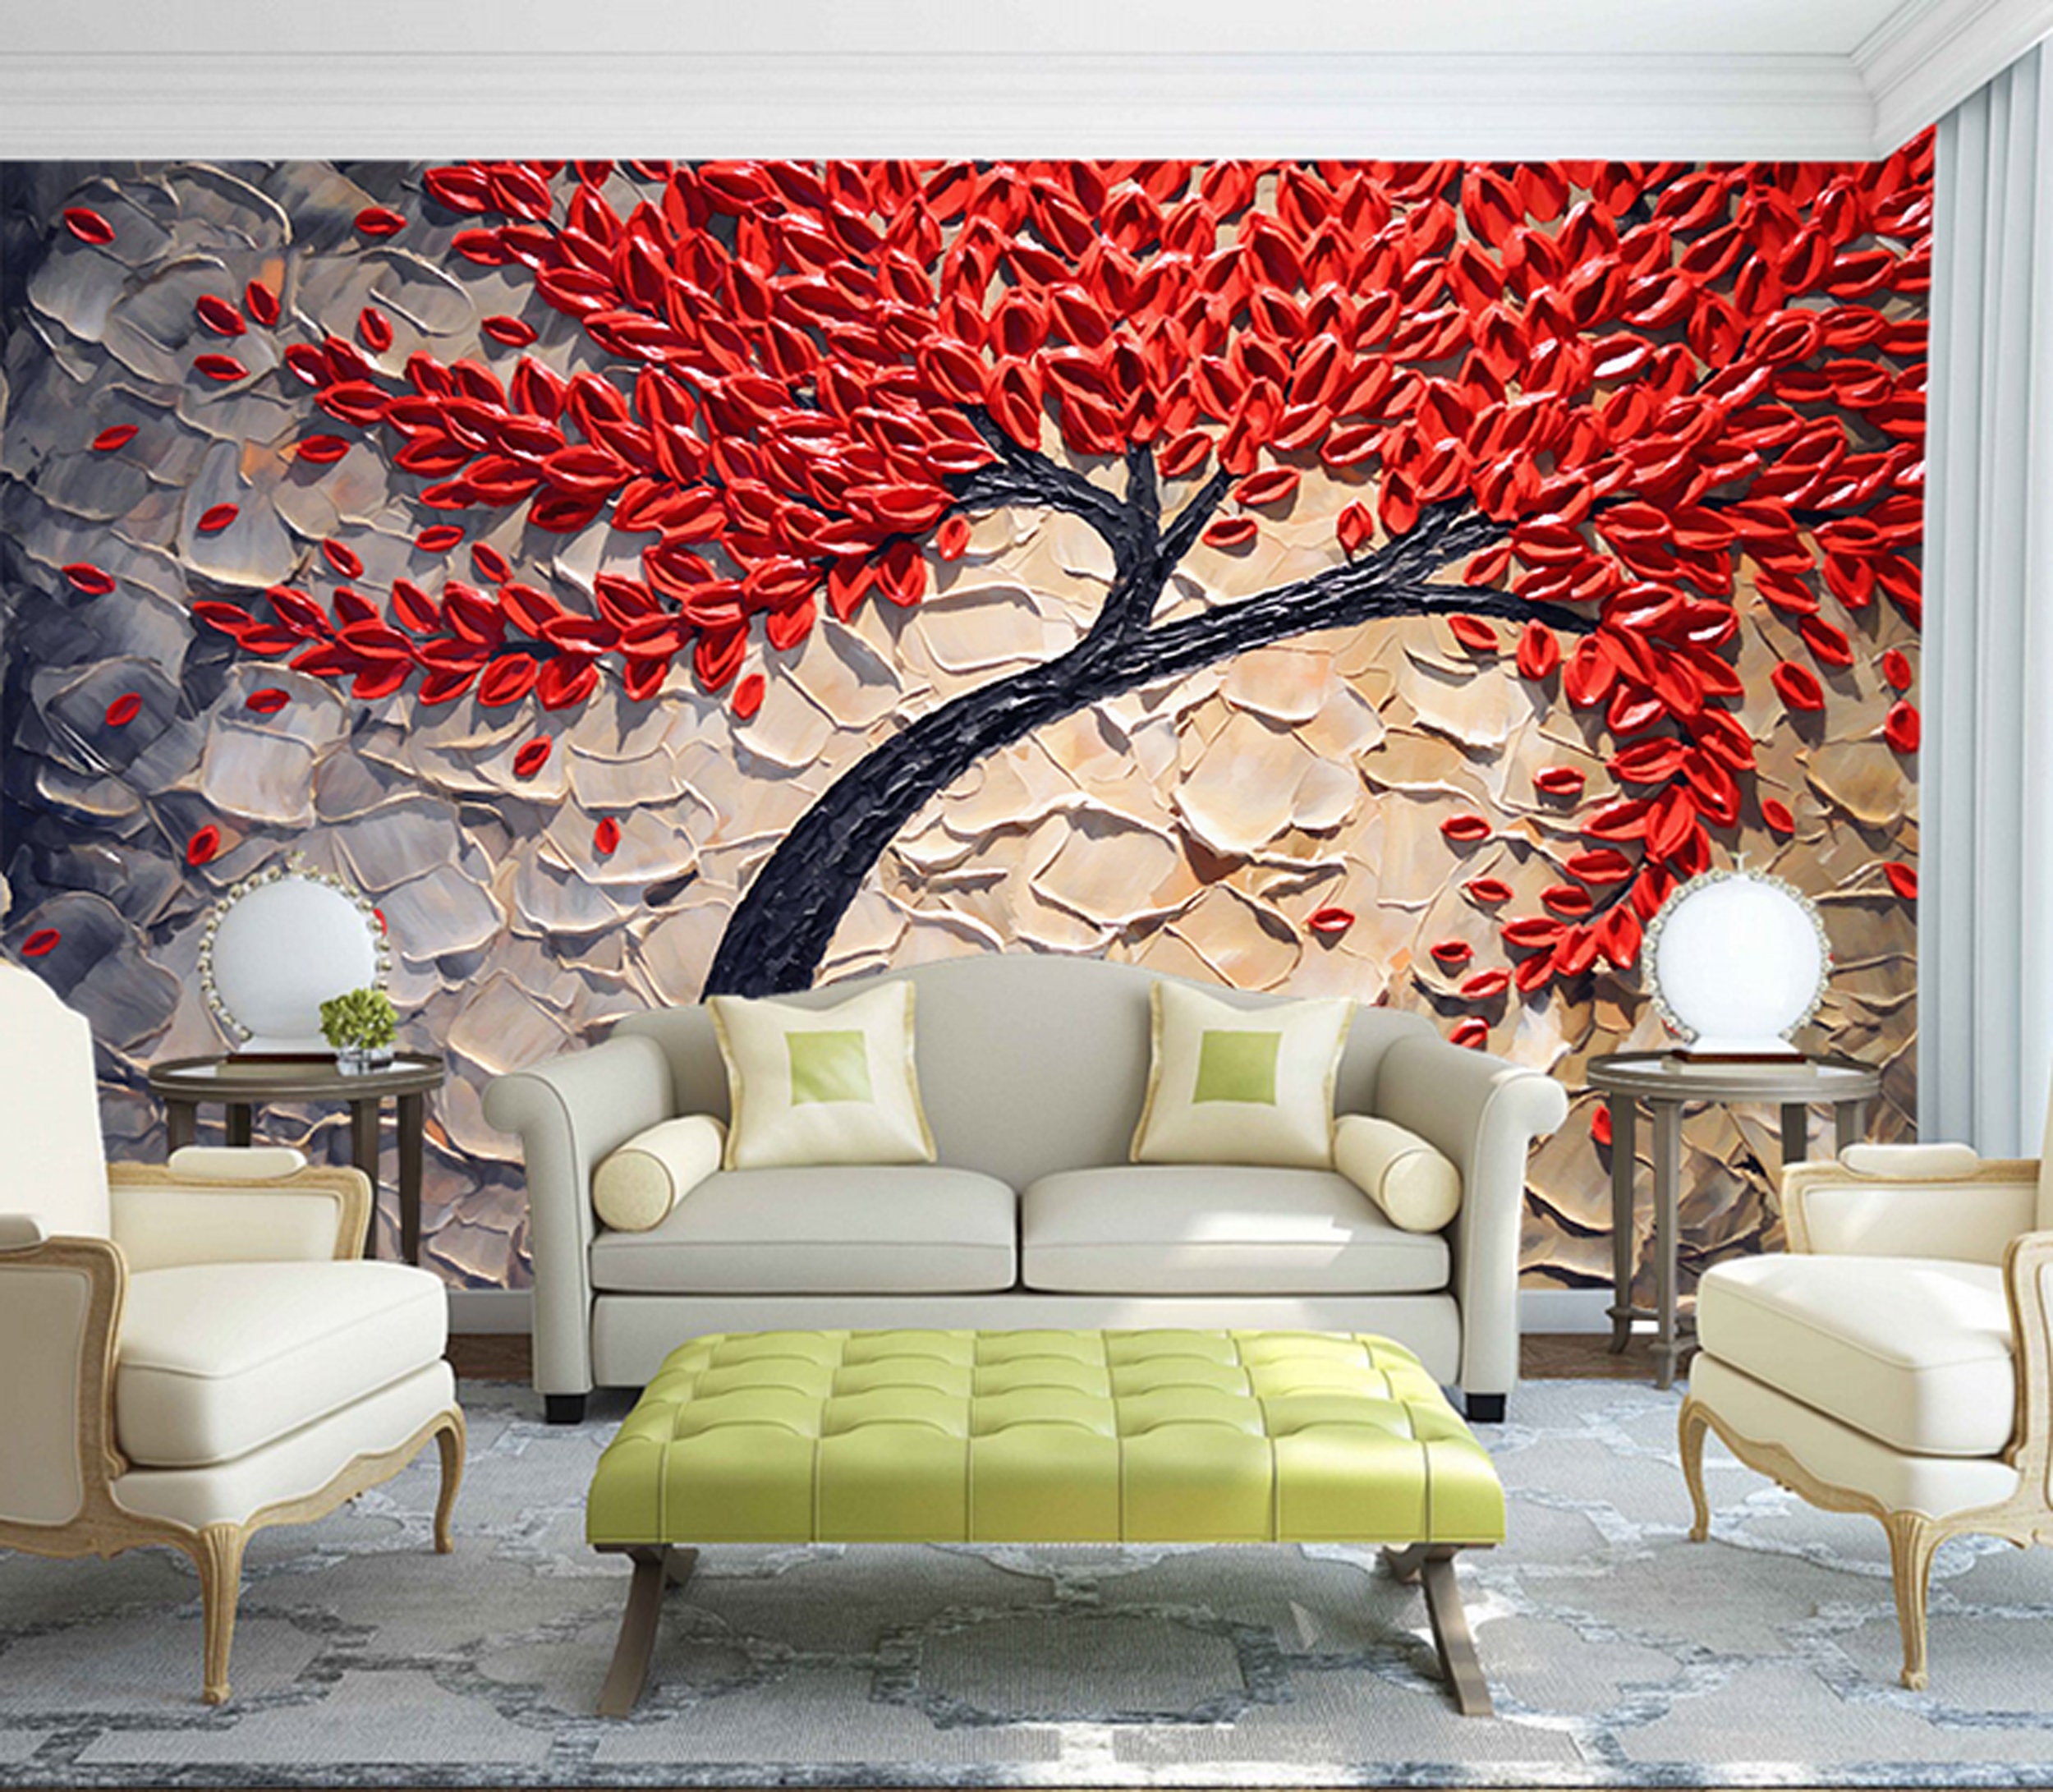 36,784 Tree Wall Painting Images, Stock Photos, 3D objects, & Vectors